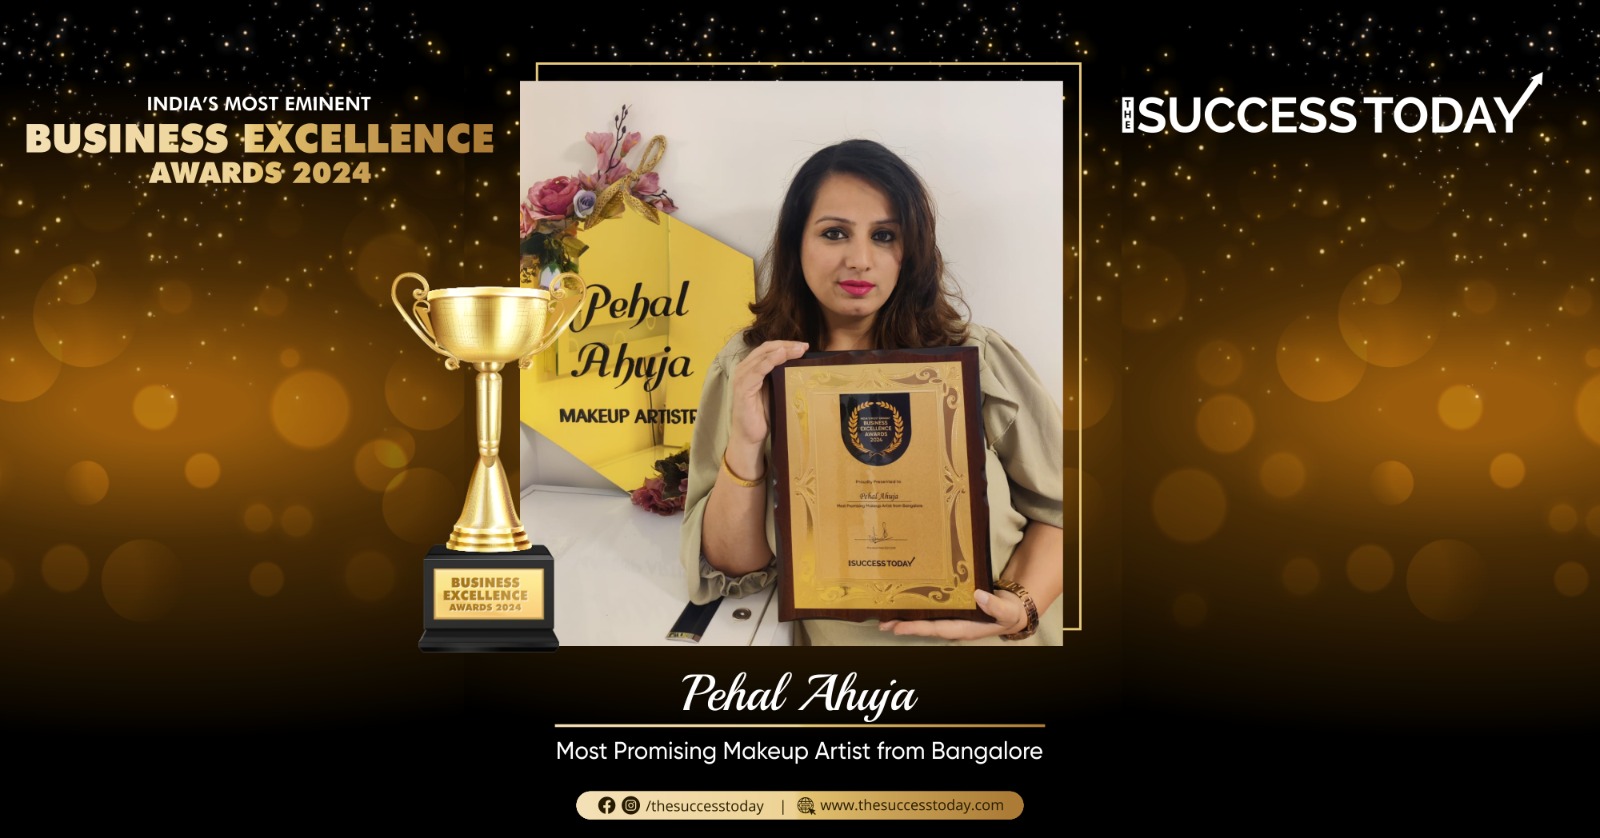 Pehal Ahuja - Most Promising Makeup Artist from Bangalore